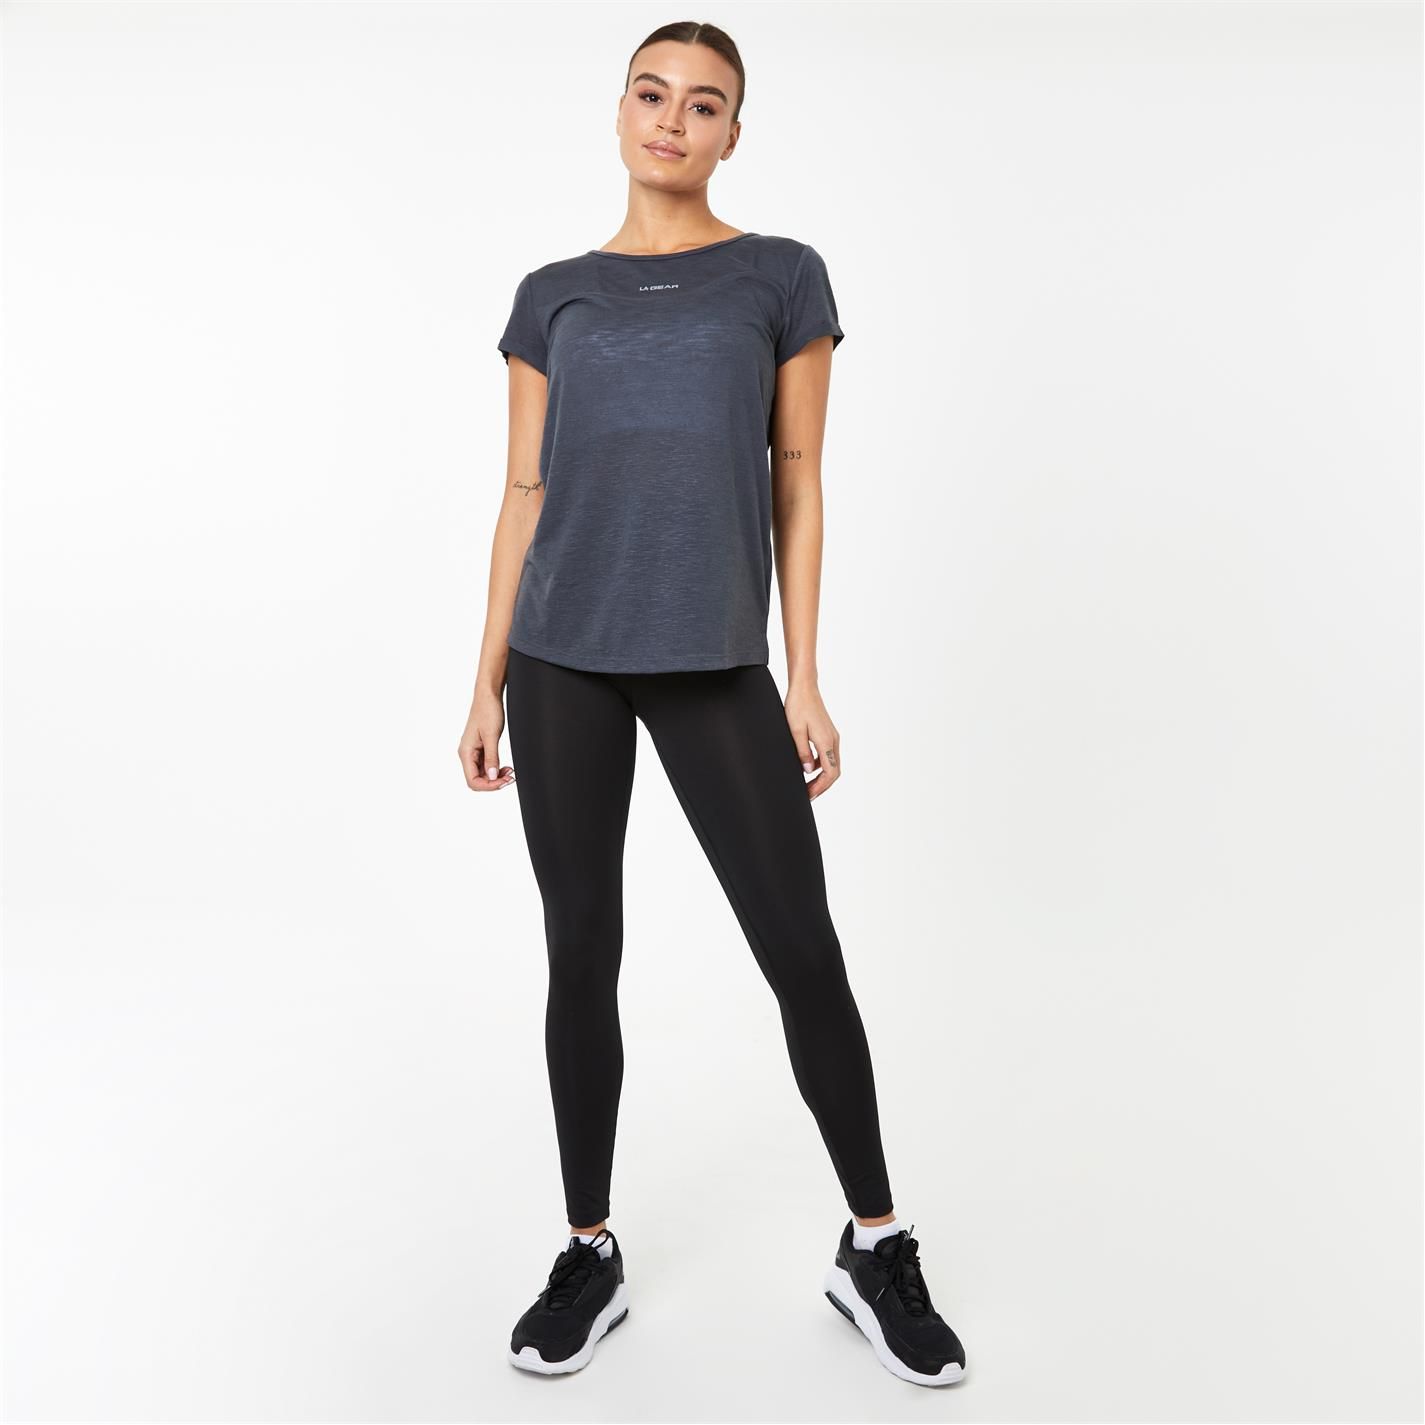 LA Gear Loose T Shirt - This LA Gear longline T-Shirt is a lightweight soft construction, vent detail that features a round neck and capped fold back sleeves. This loose fitting breathable design is complete with flat lock seams to ensure all day comfort. The look is complete with subtle LA Gear branding to one side of the chest to complete the sporty look. 89% polyester 11% viscose. This product may have slight cosmetic differences from the image shown due to assorted colours or updated seasonal collections.